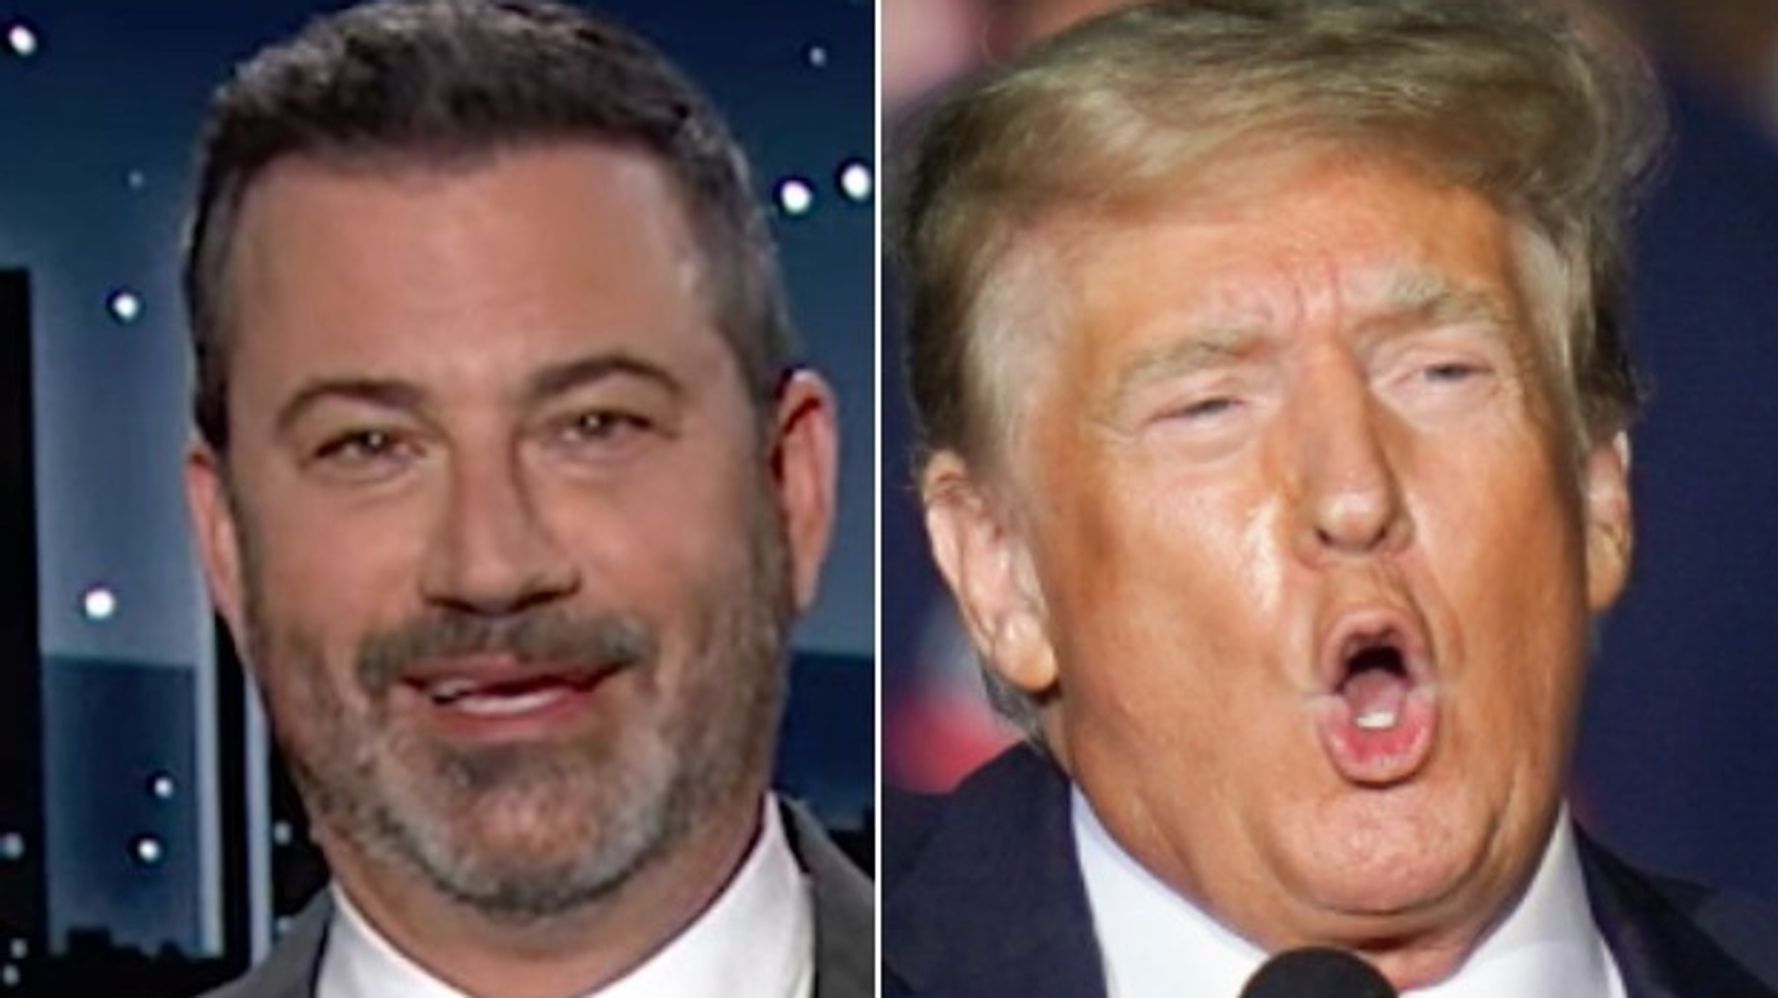 Jimmy Kimmel Just Made 1 Of Trump's Biggest Fears Come True